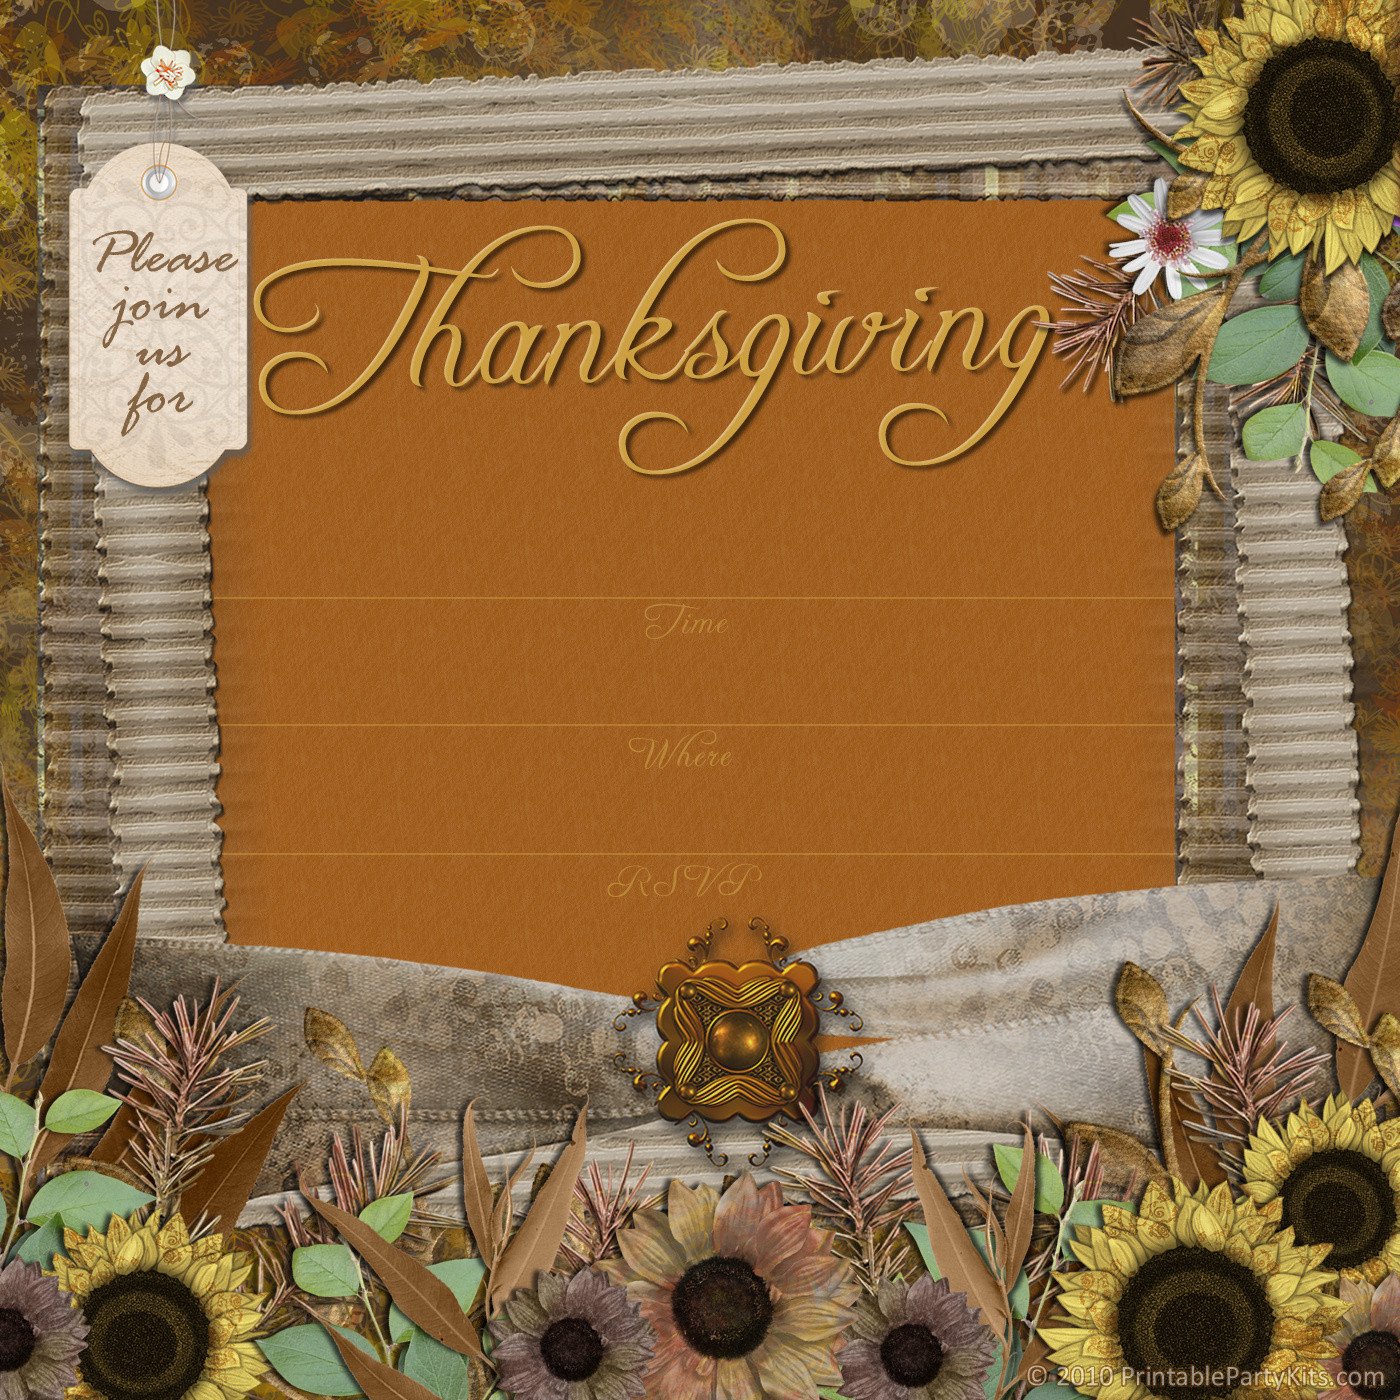 Free Printable Party Invitations Thanksgiving Dinner